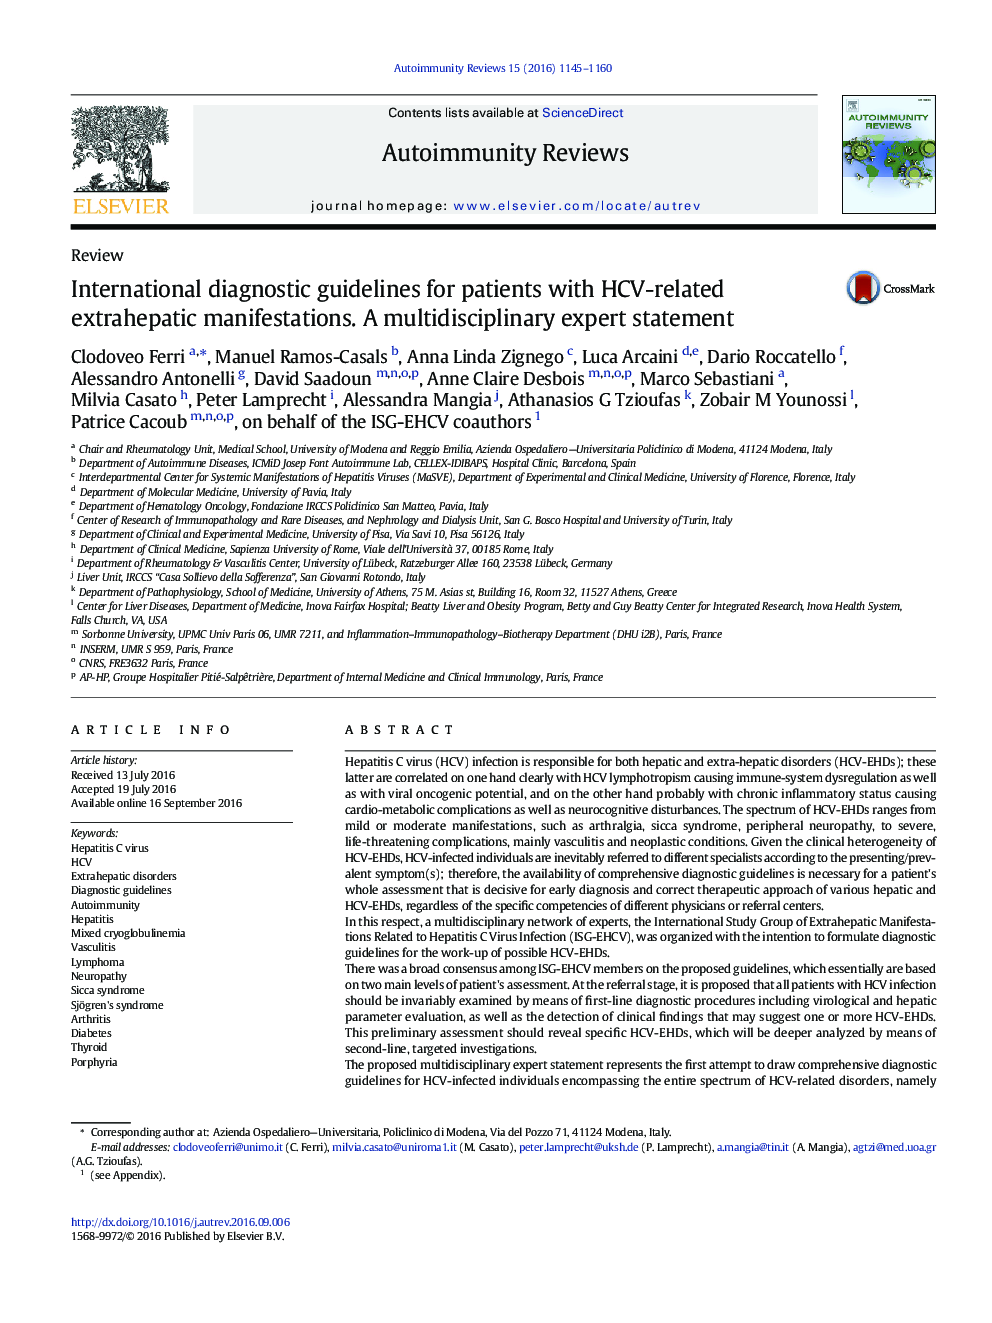 International diagnostic guidelines for patients with HCV-related extrahepatic manifestations. A multidisciplinary expert statement